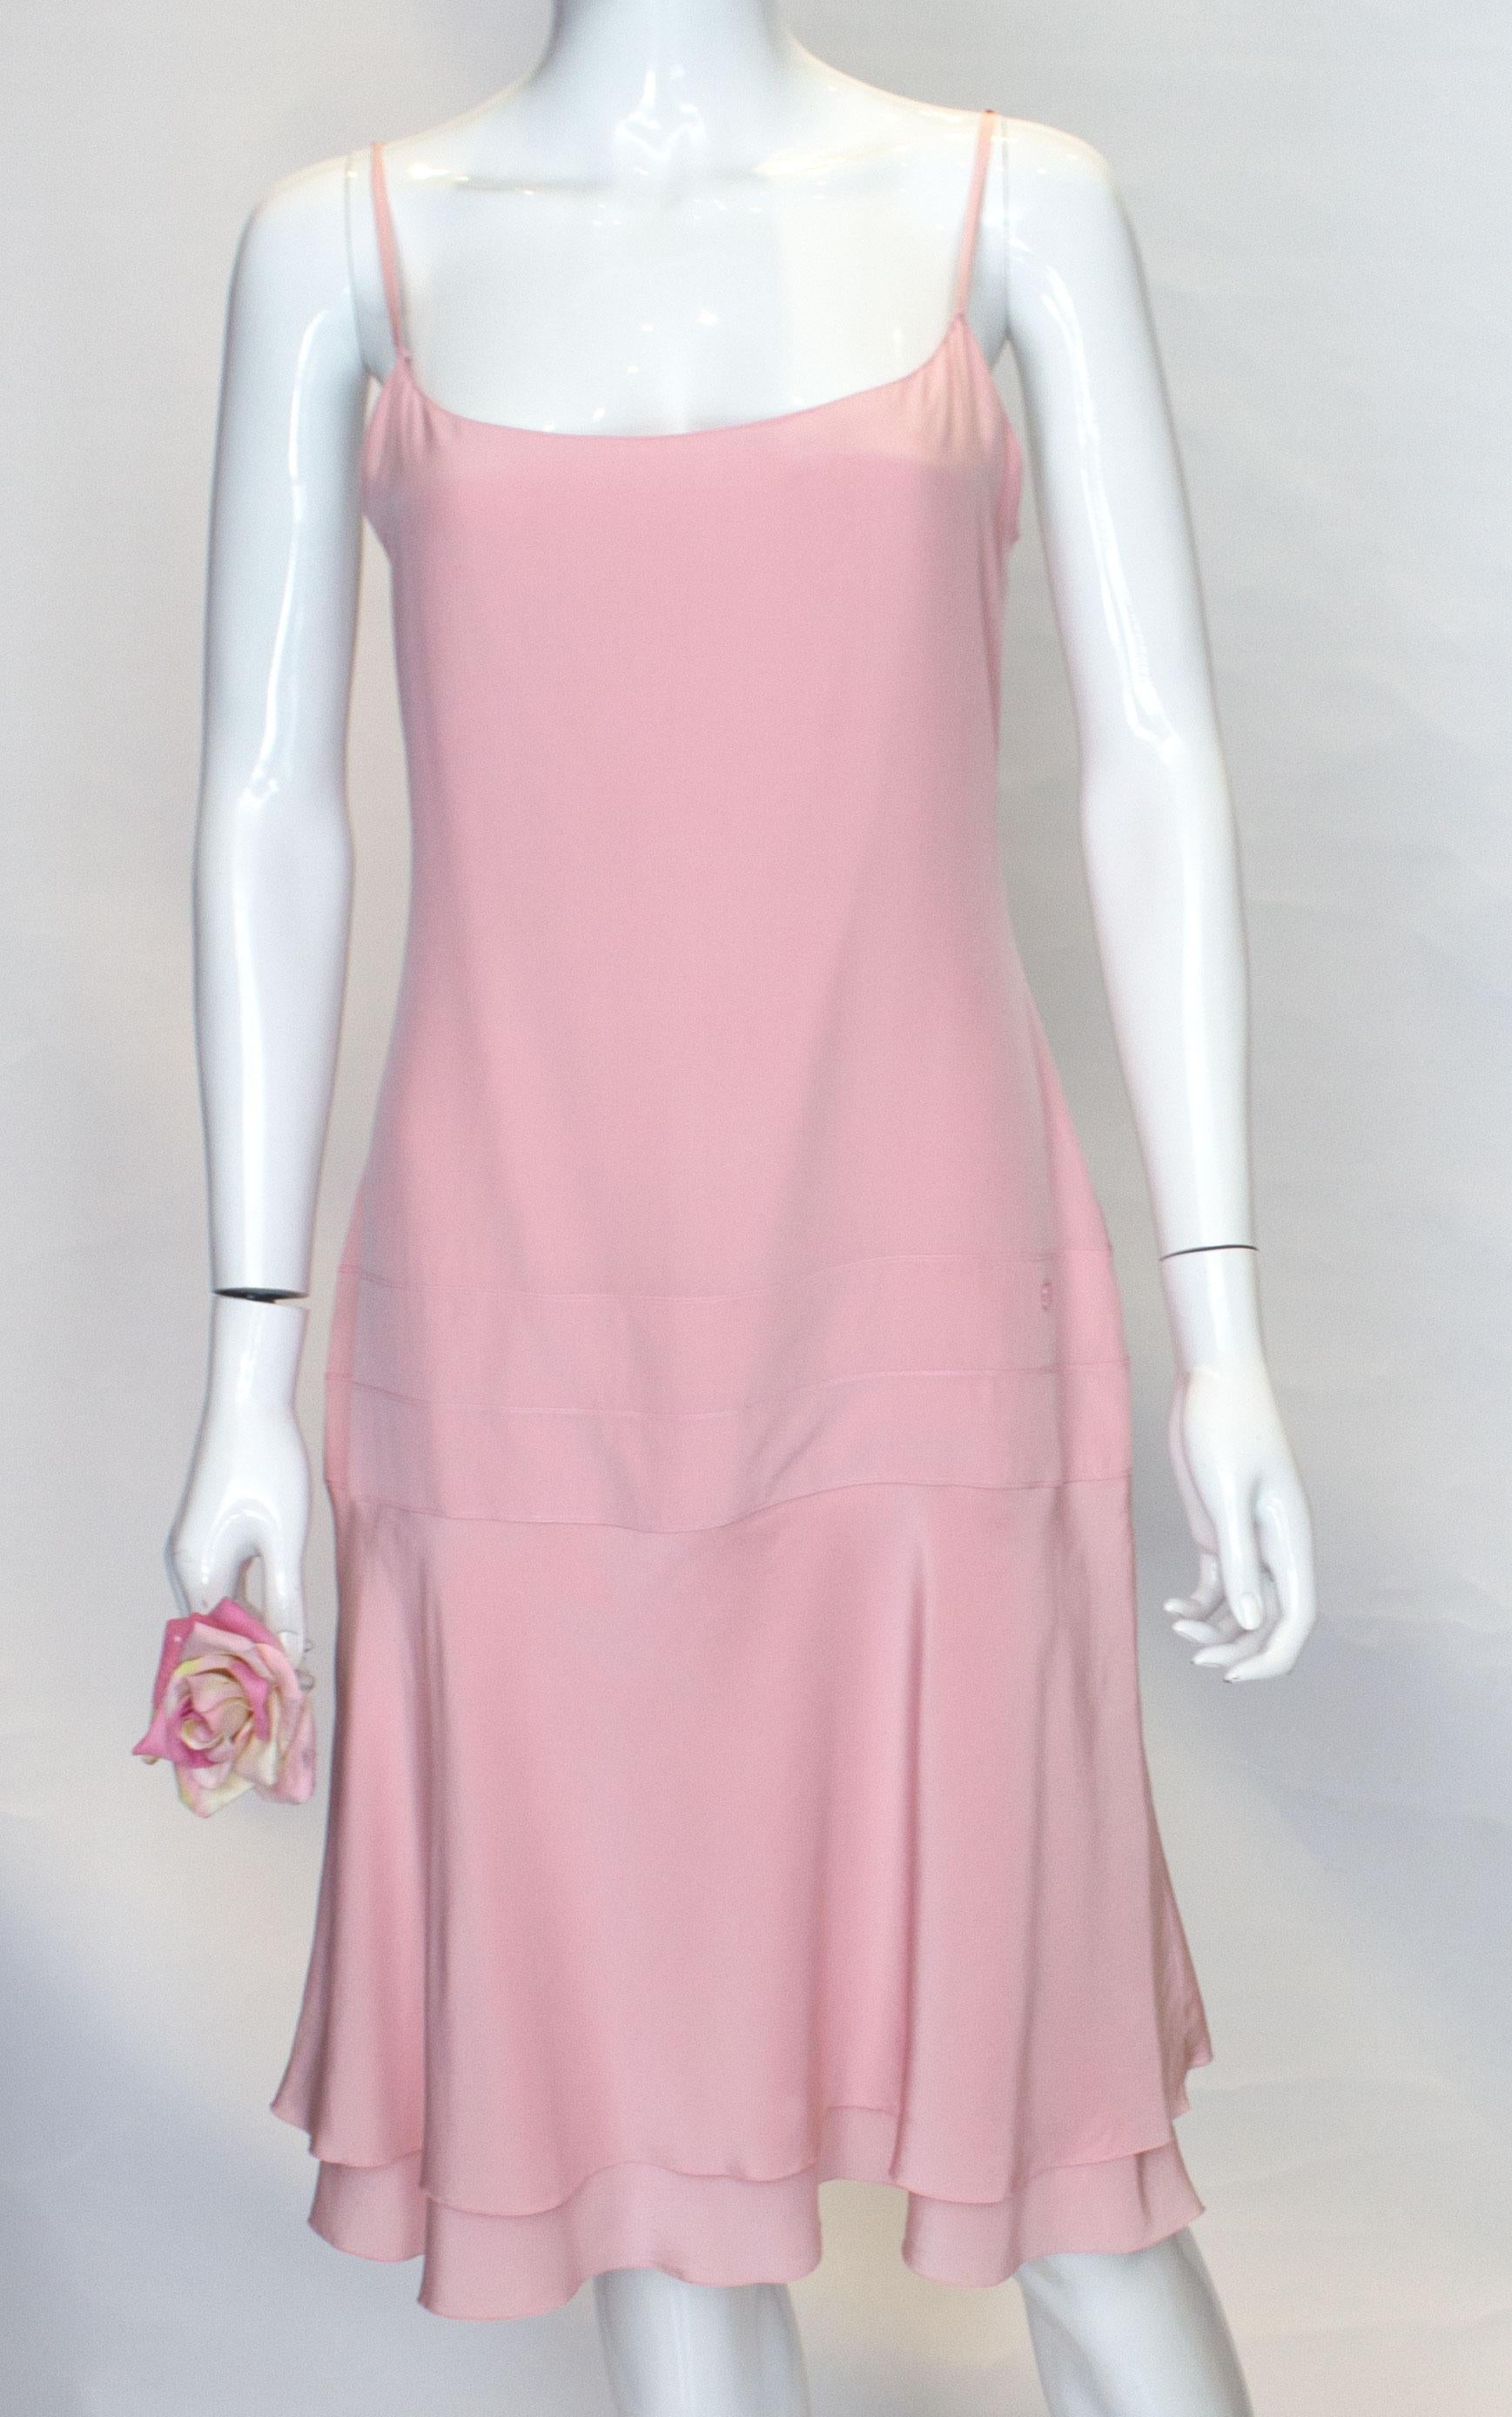 A pretty dress for Summer by Chanel. This dress is easy to wear and the fared hem moves with you as you walk.
It is super soft silk on the outside and lining, and has spagetti straps and a central back zip. There is a subtle Chanel detail at hip